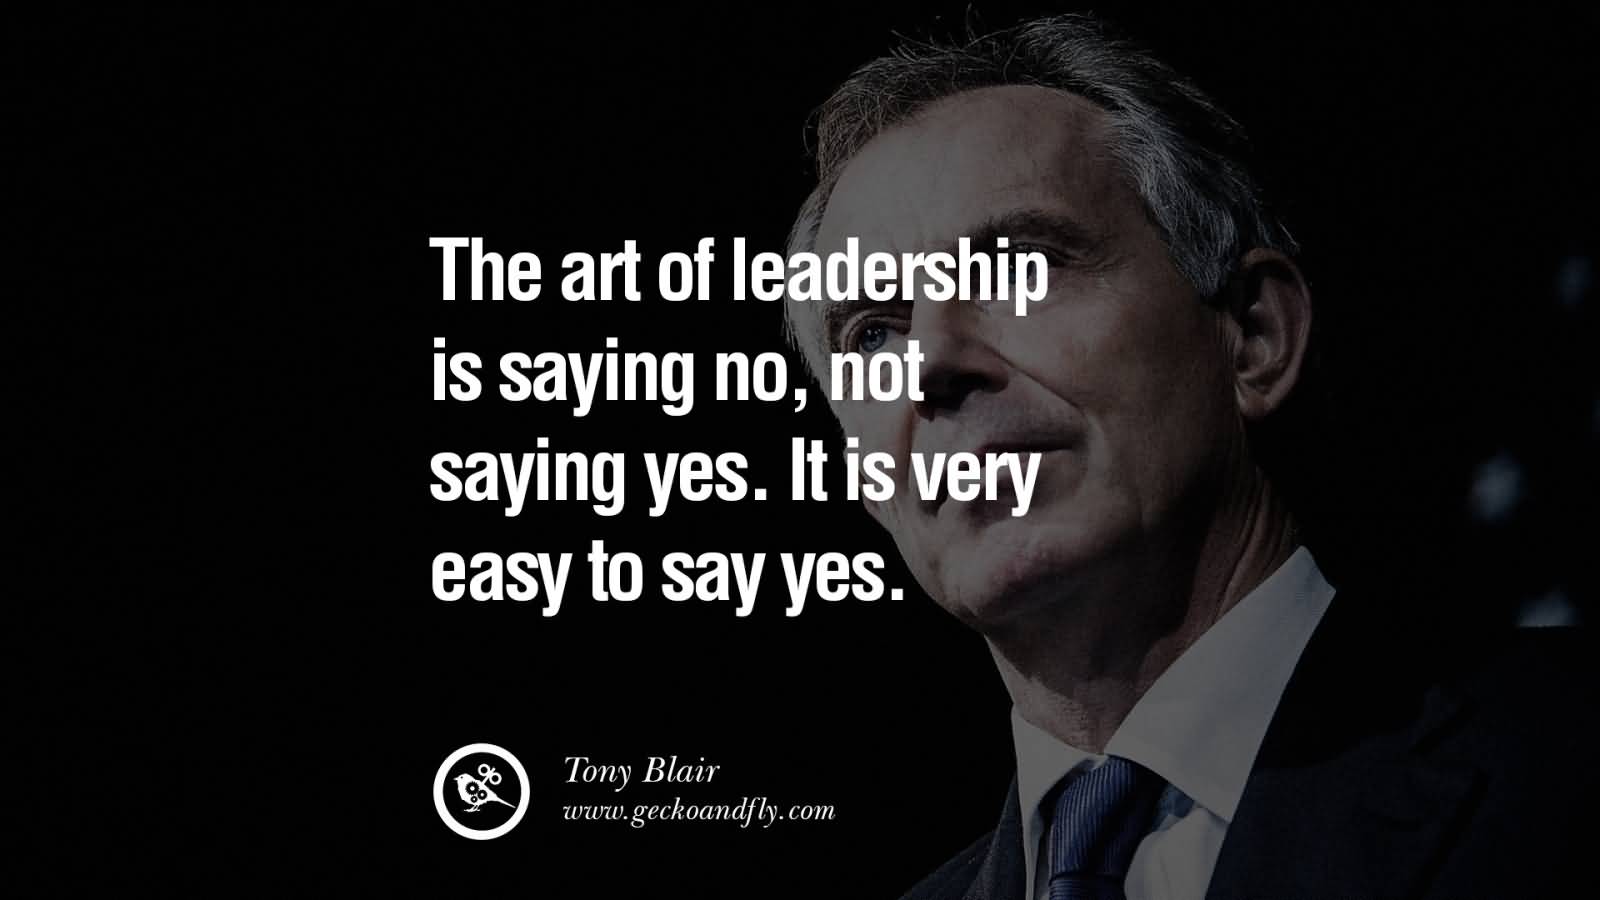 The art of leadership is saying no, not saying yes. It is very easy to say yes. Tony Blair